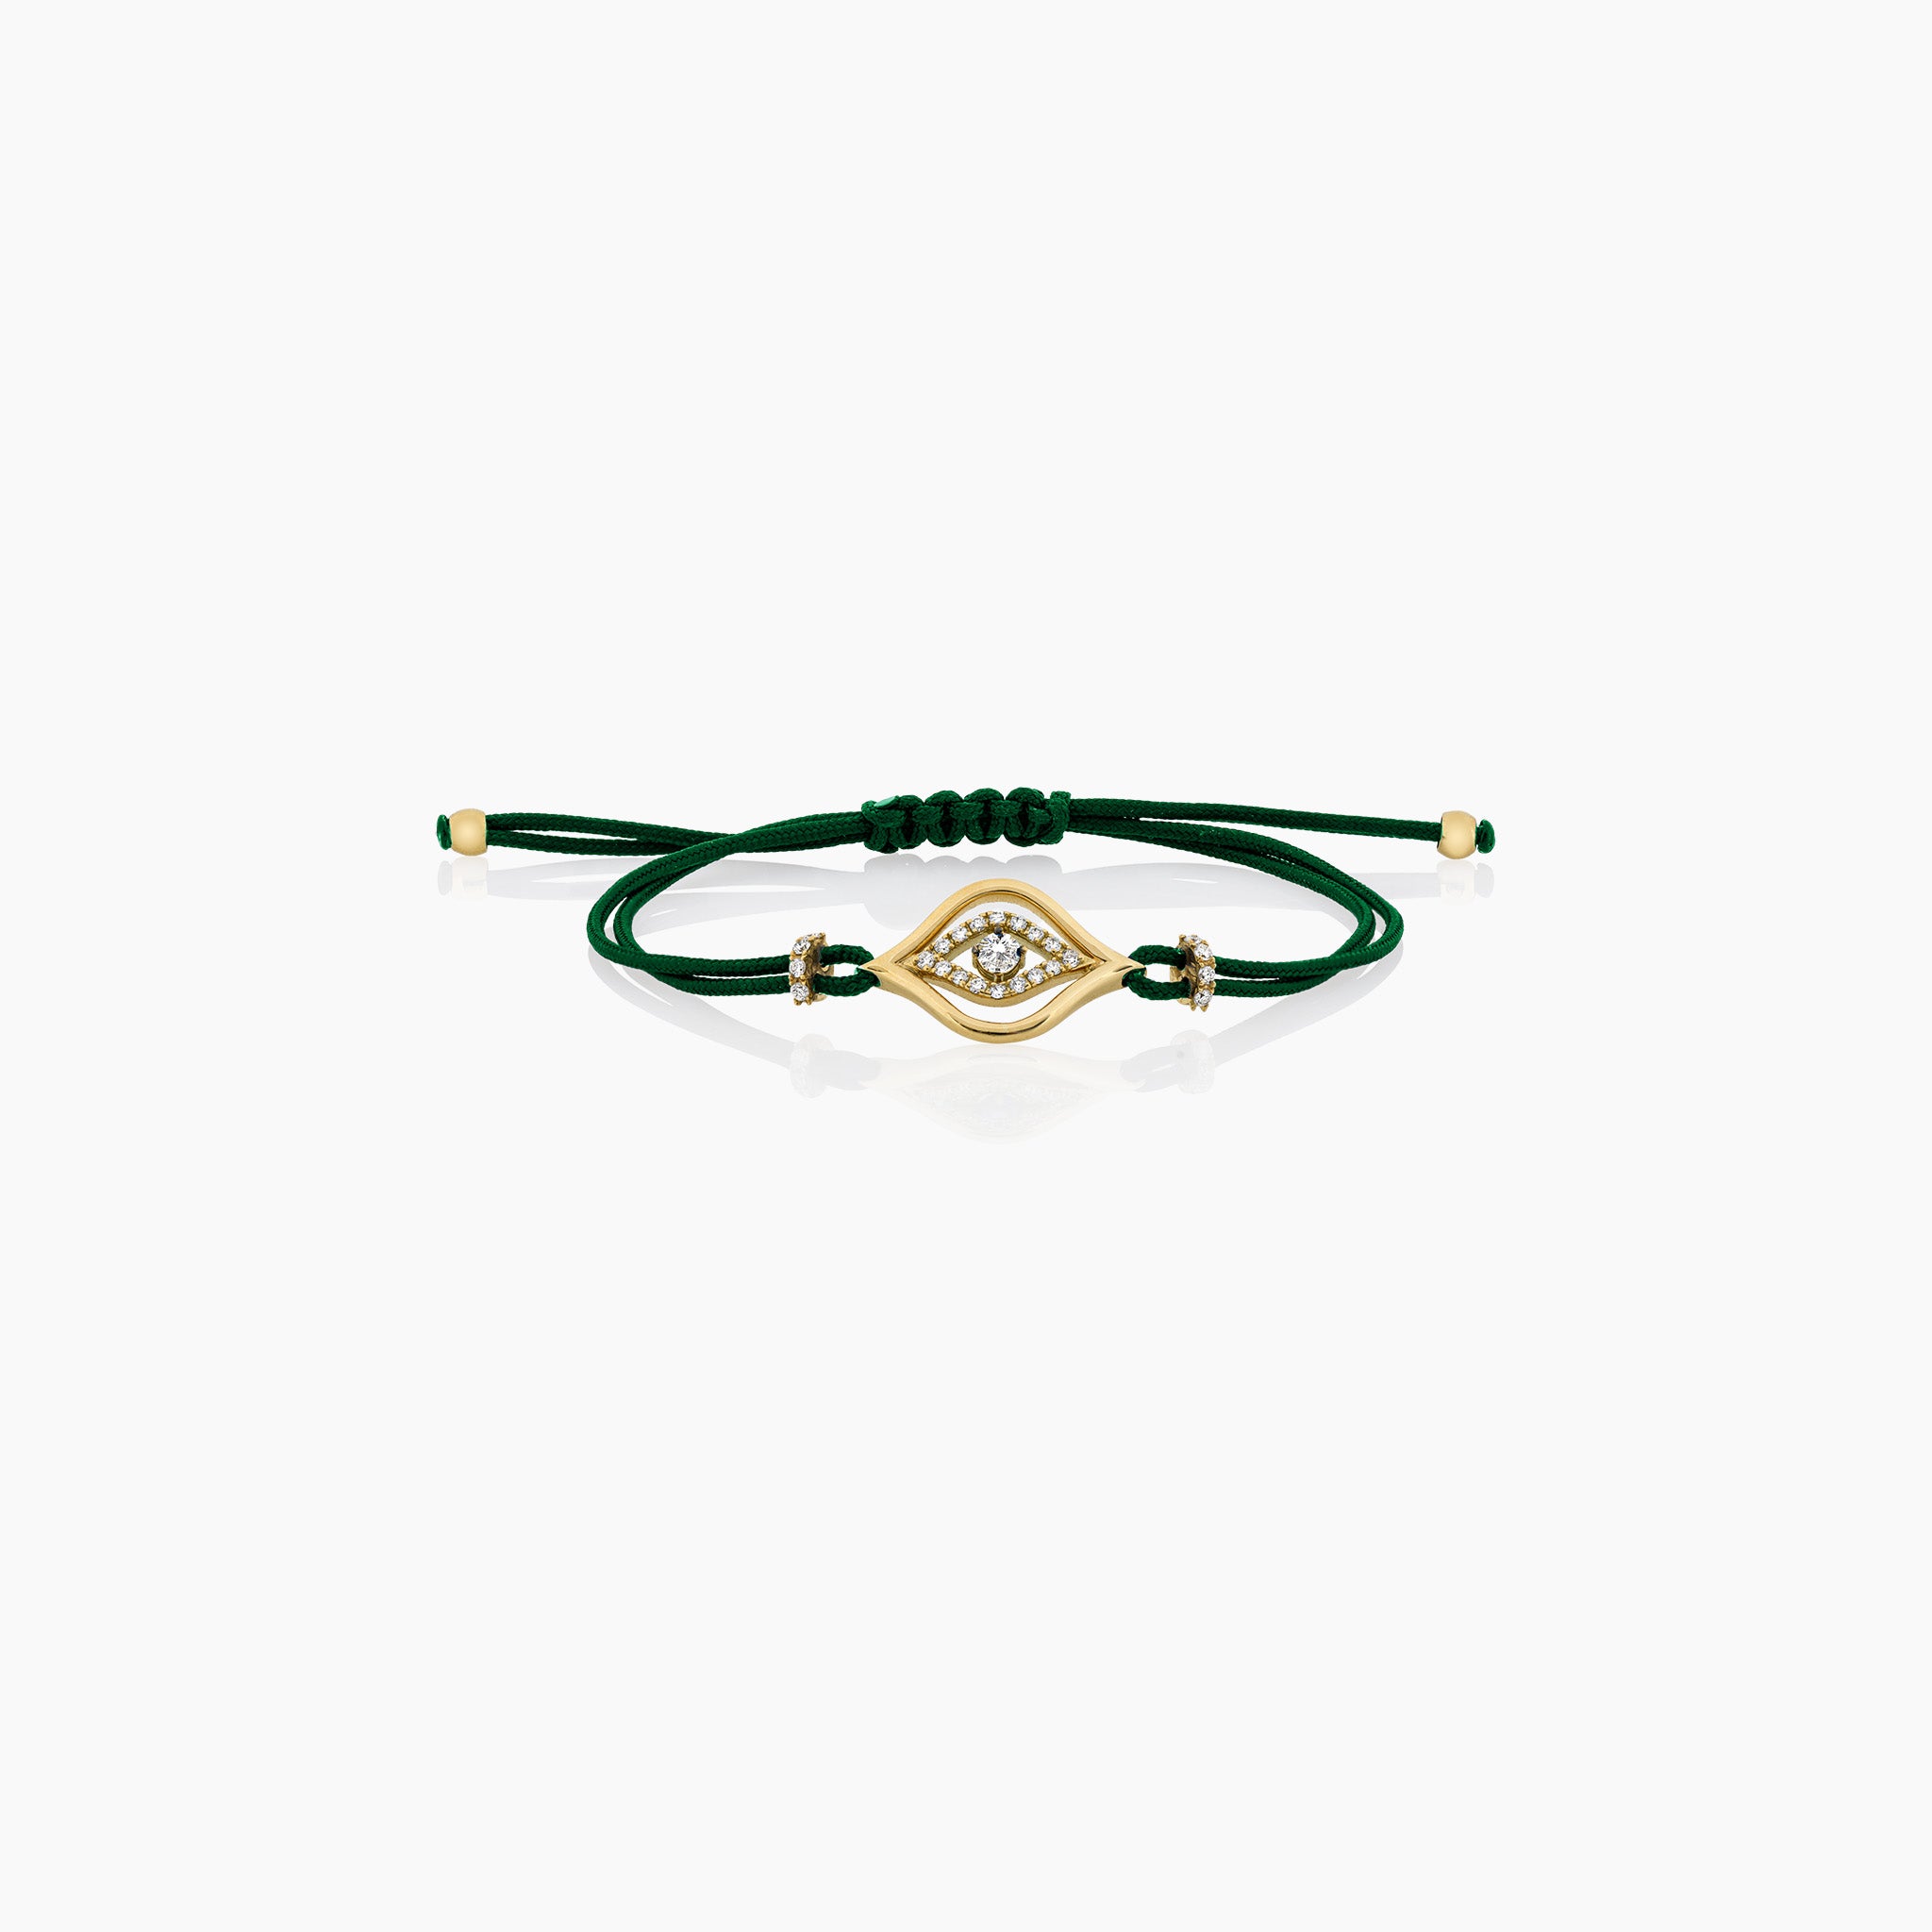 A stylish evil eye cord bracelet featuring diamonds, set on a cord, presented against an off-white background. 